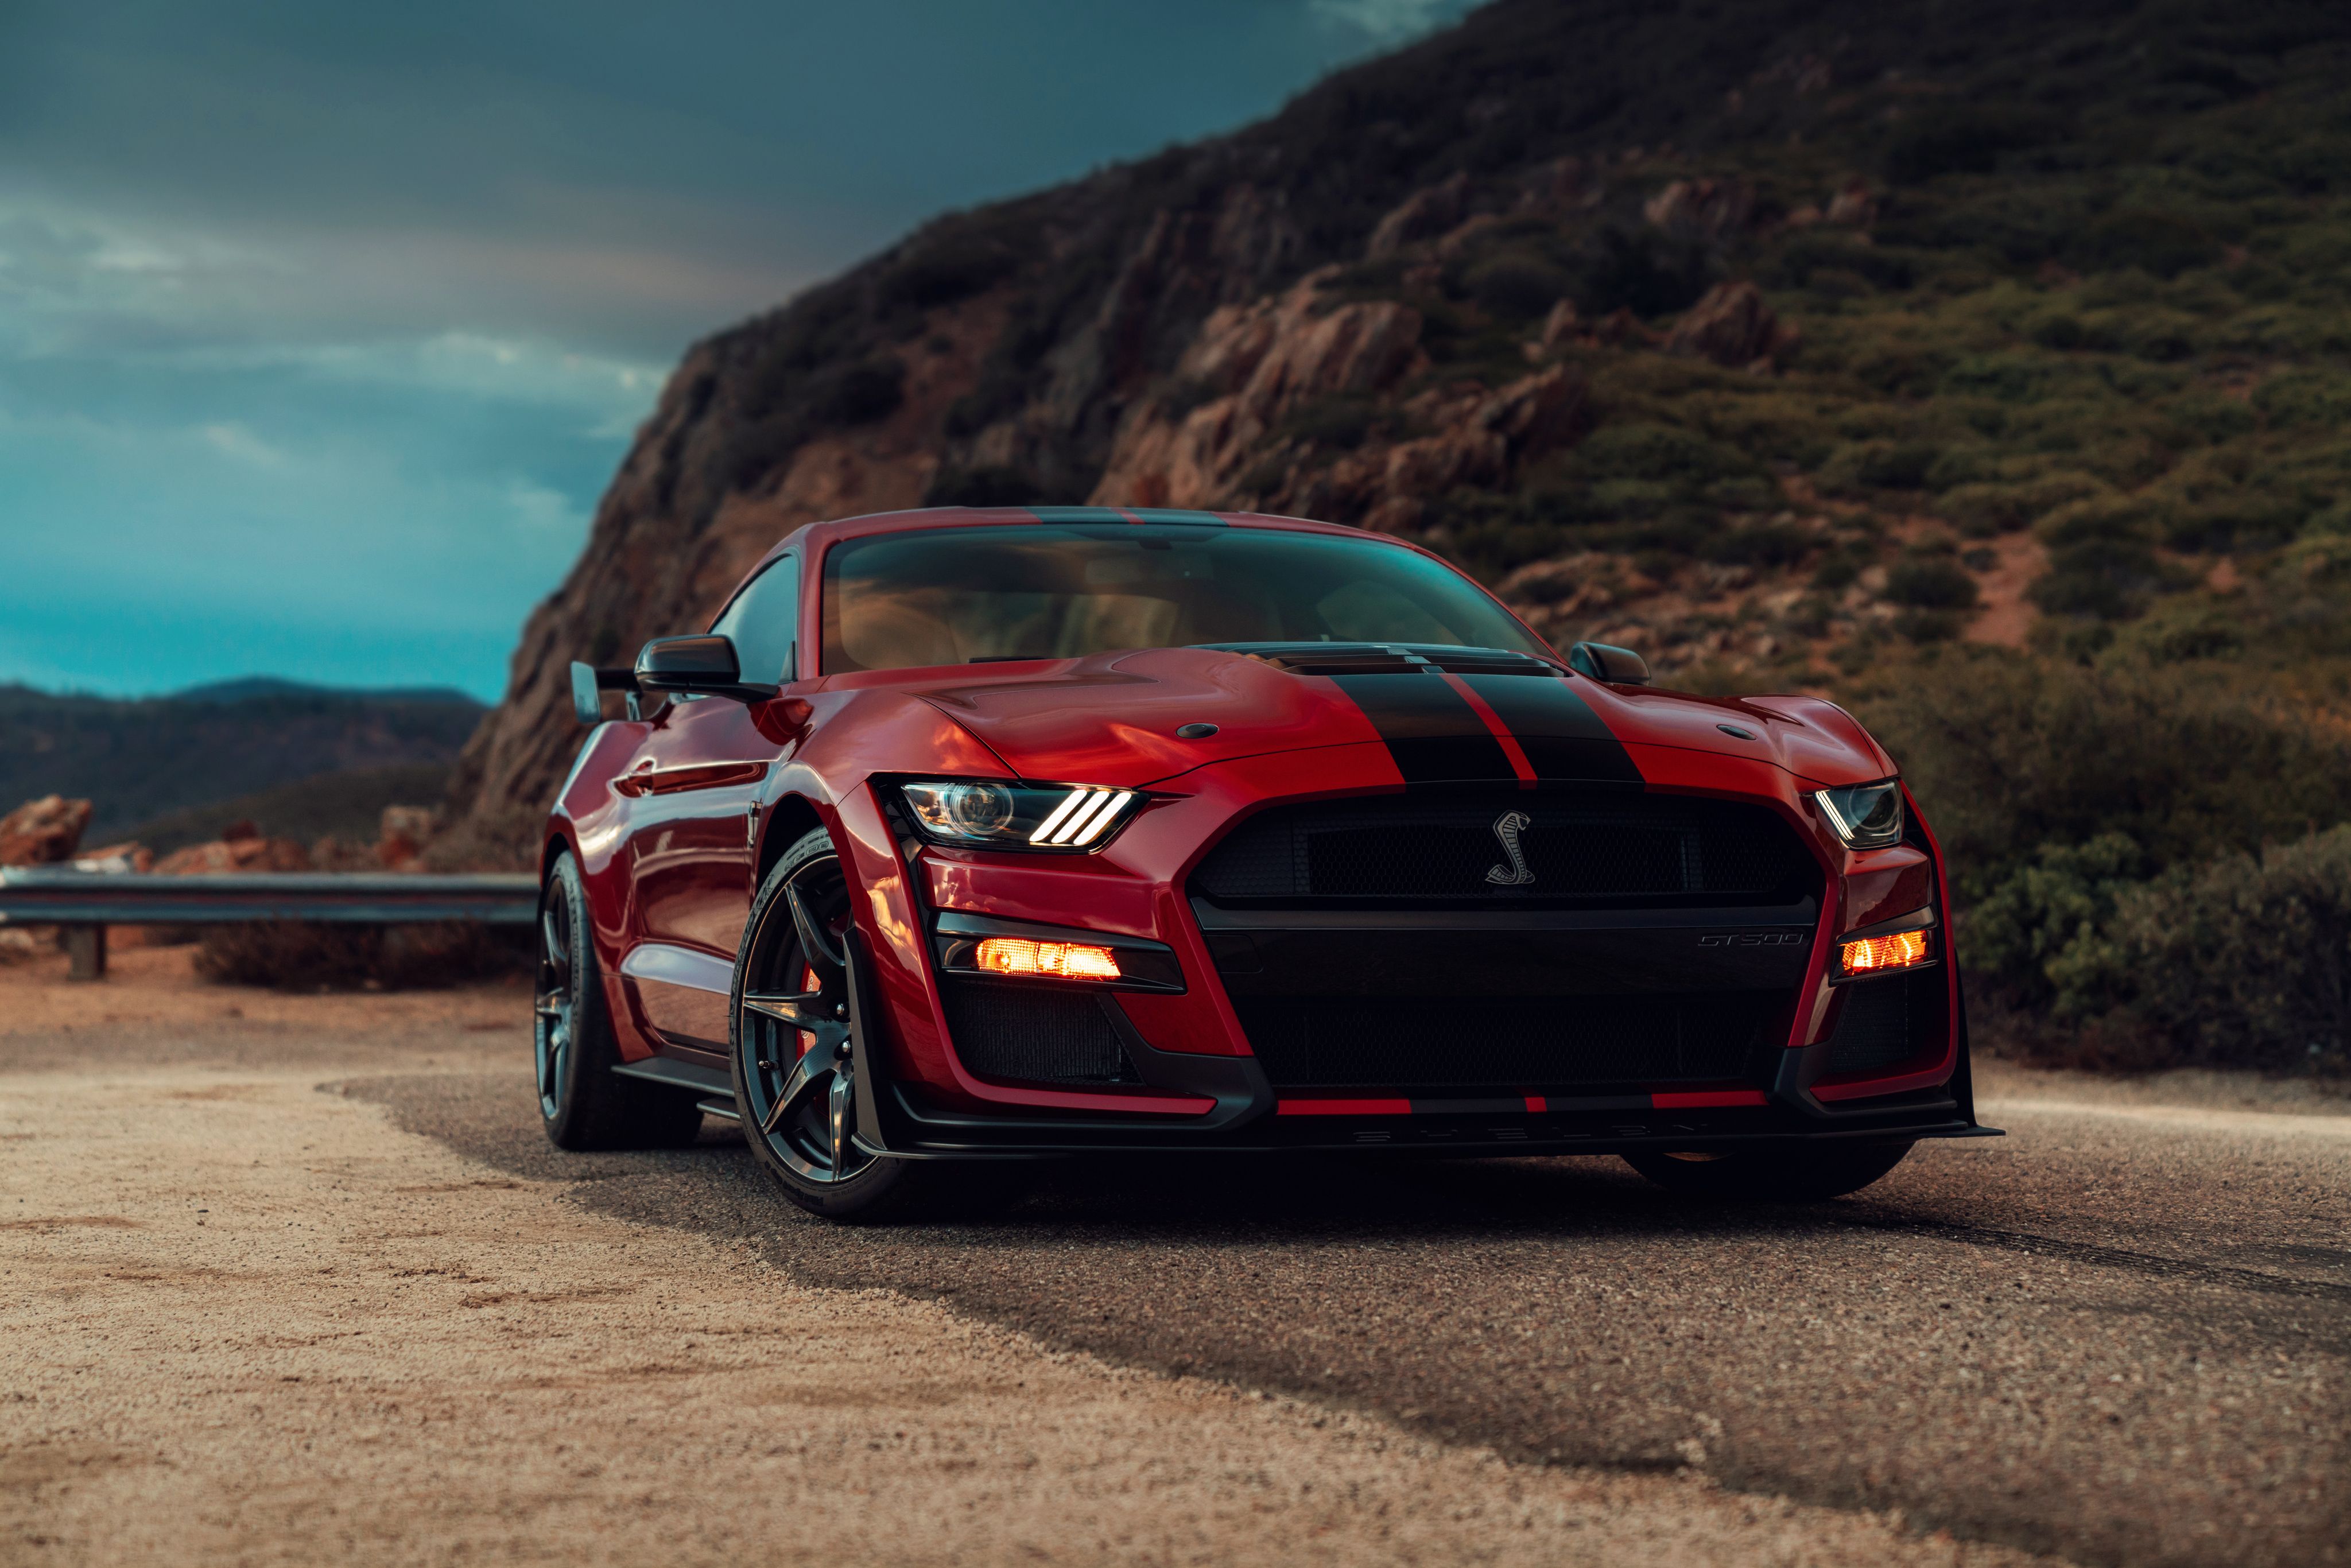 Ford Mustang Shelby GT HD Cars, 4k Wallpaper, Image